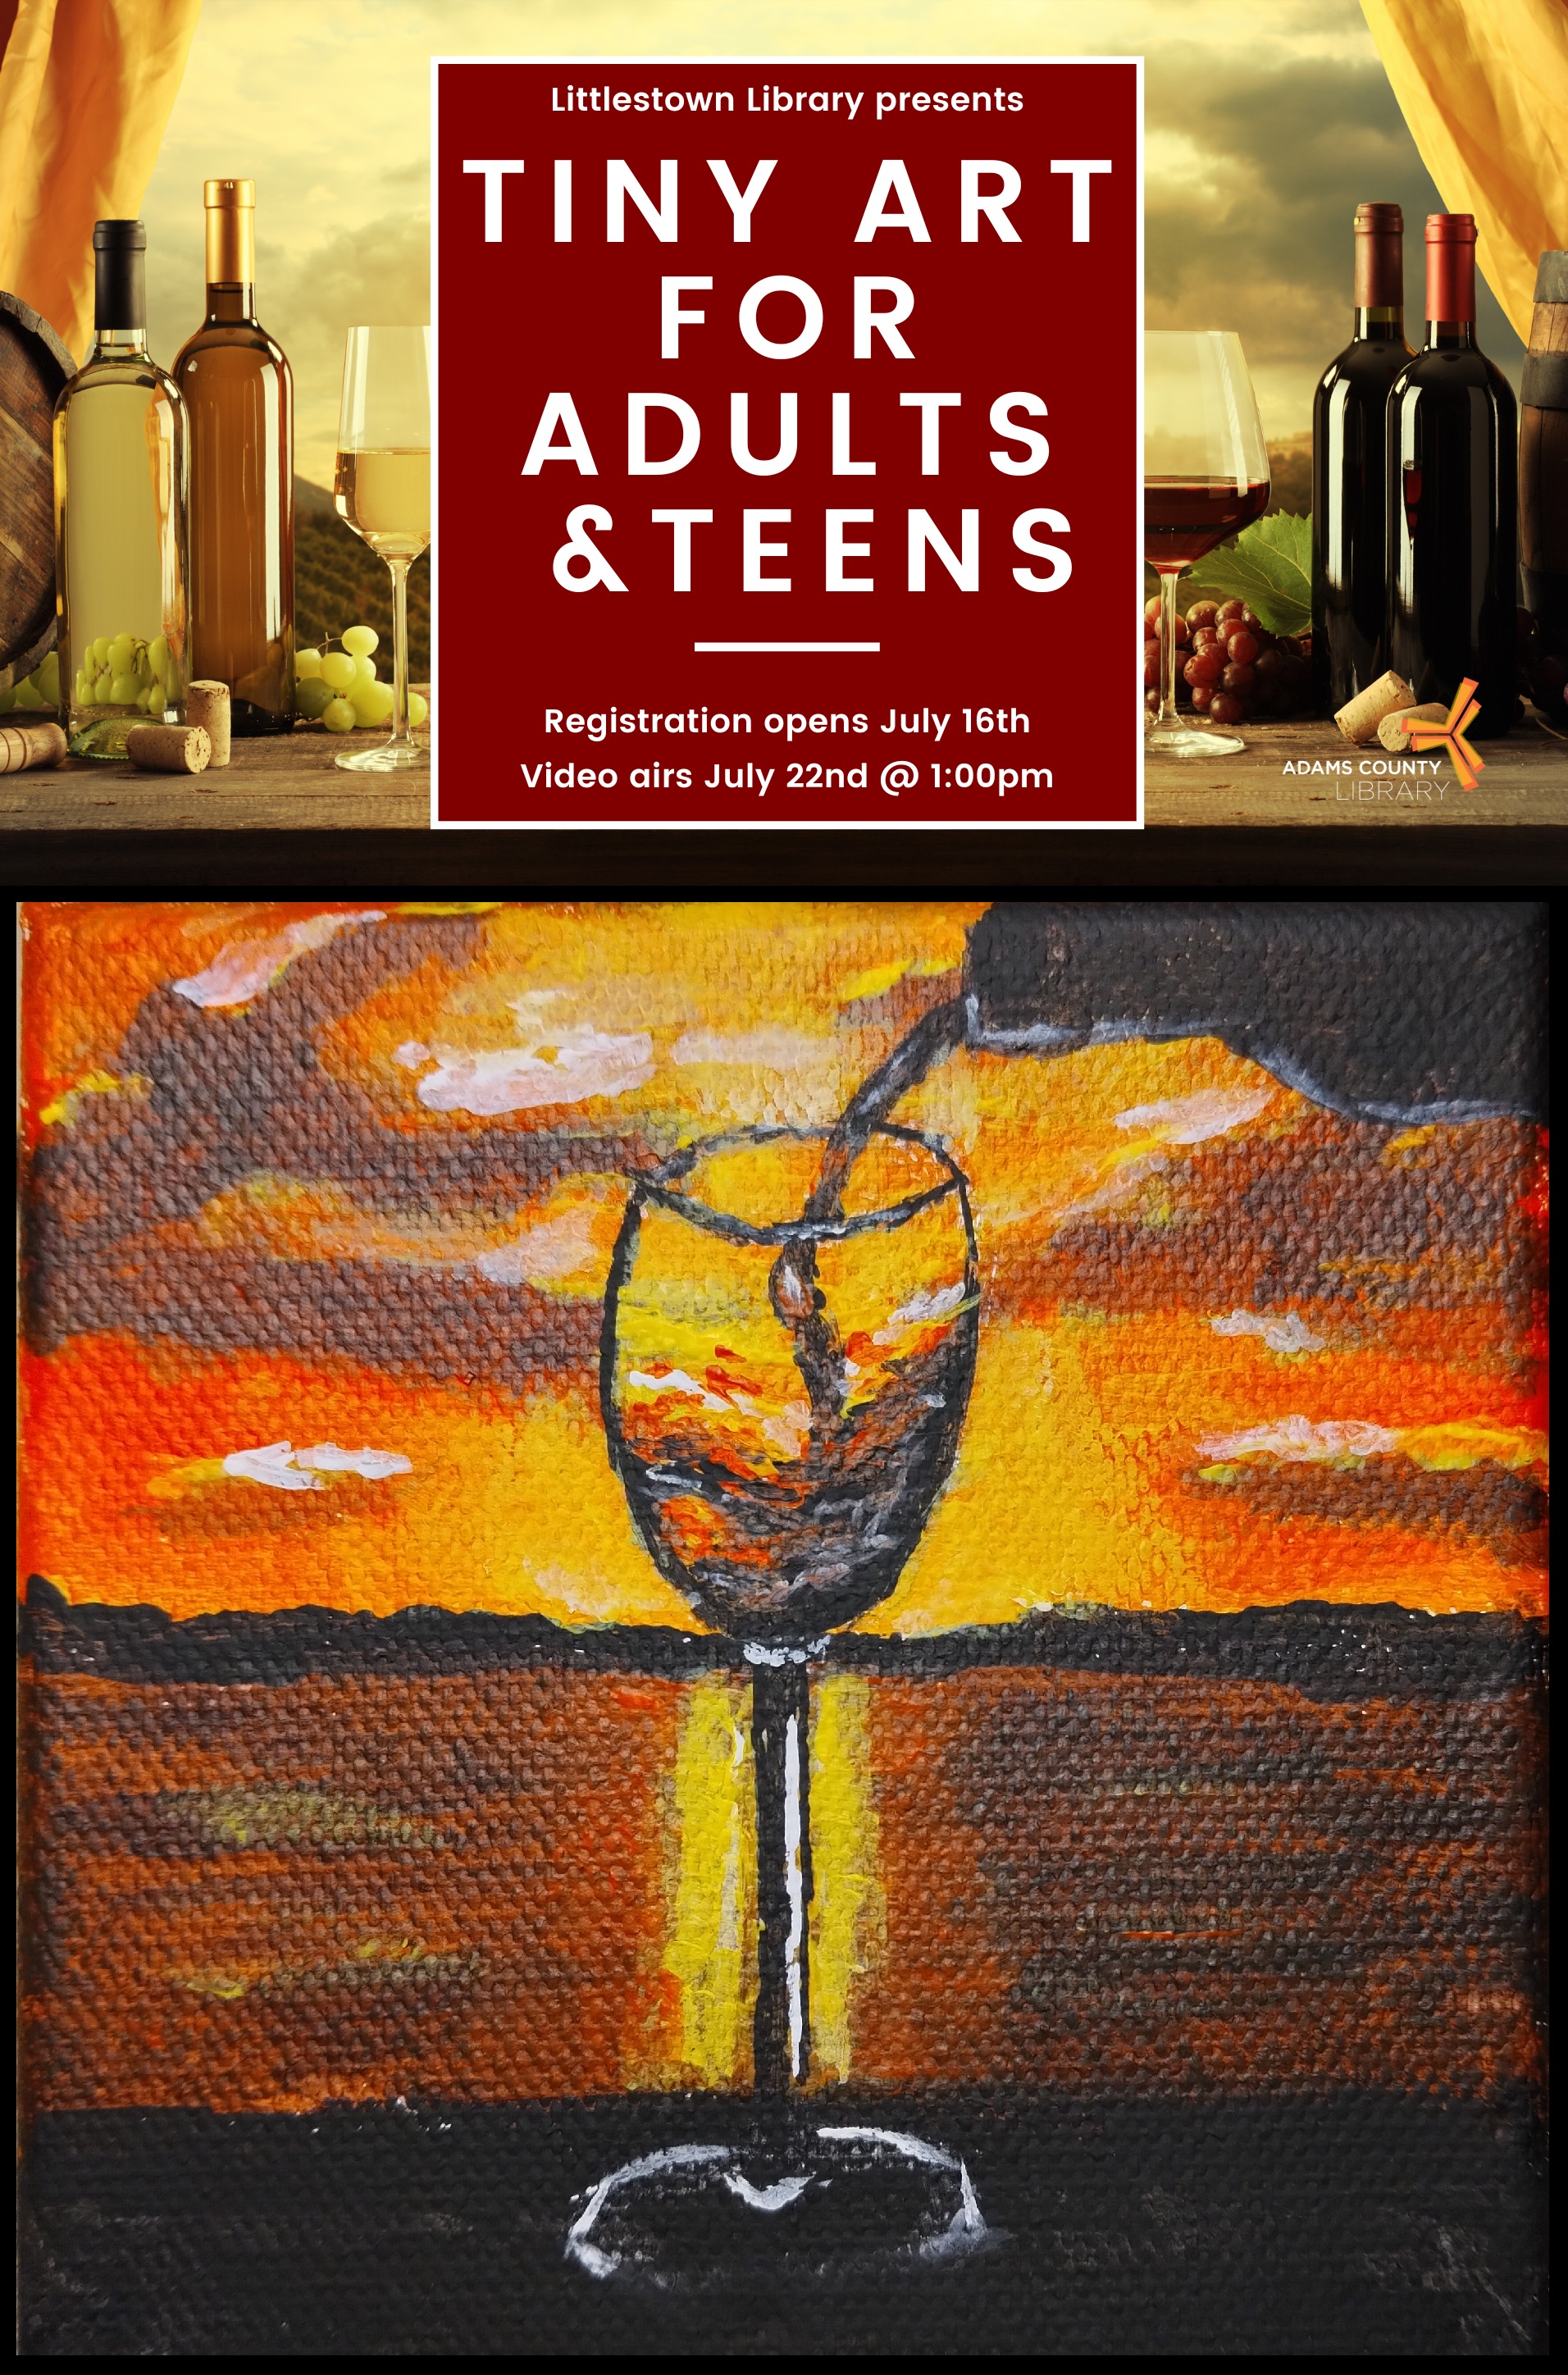 Tiny Art for Adults and Teens - Relax With a Glass